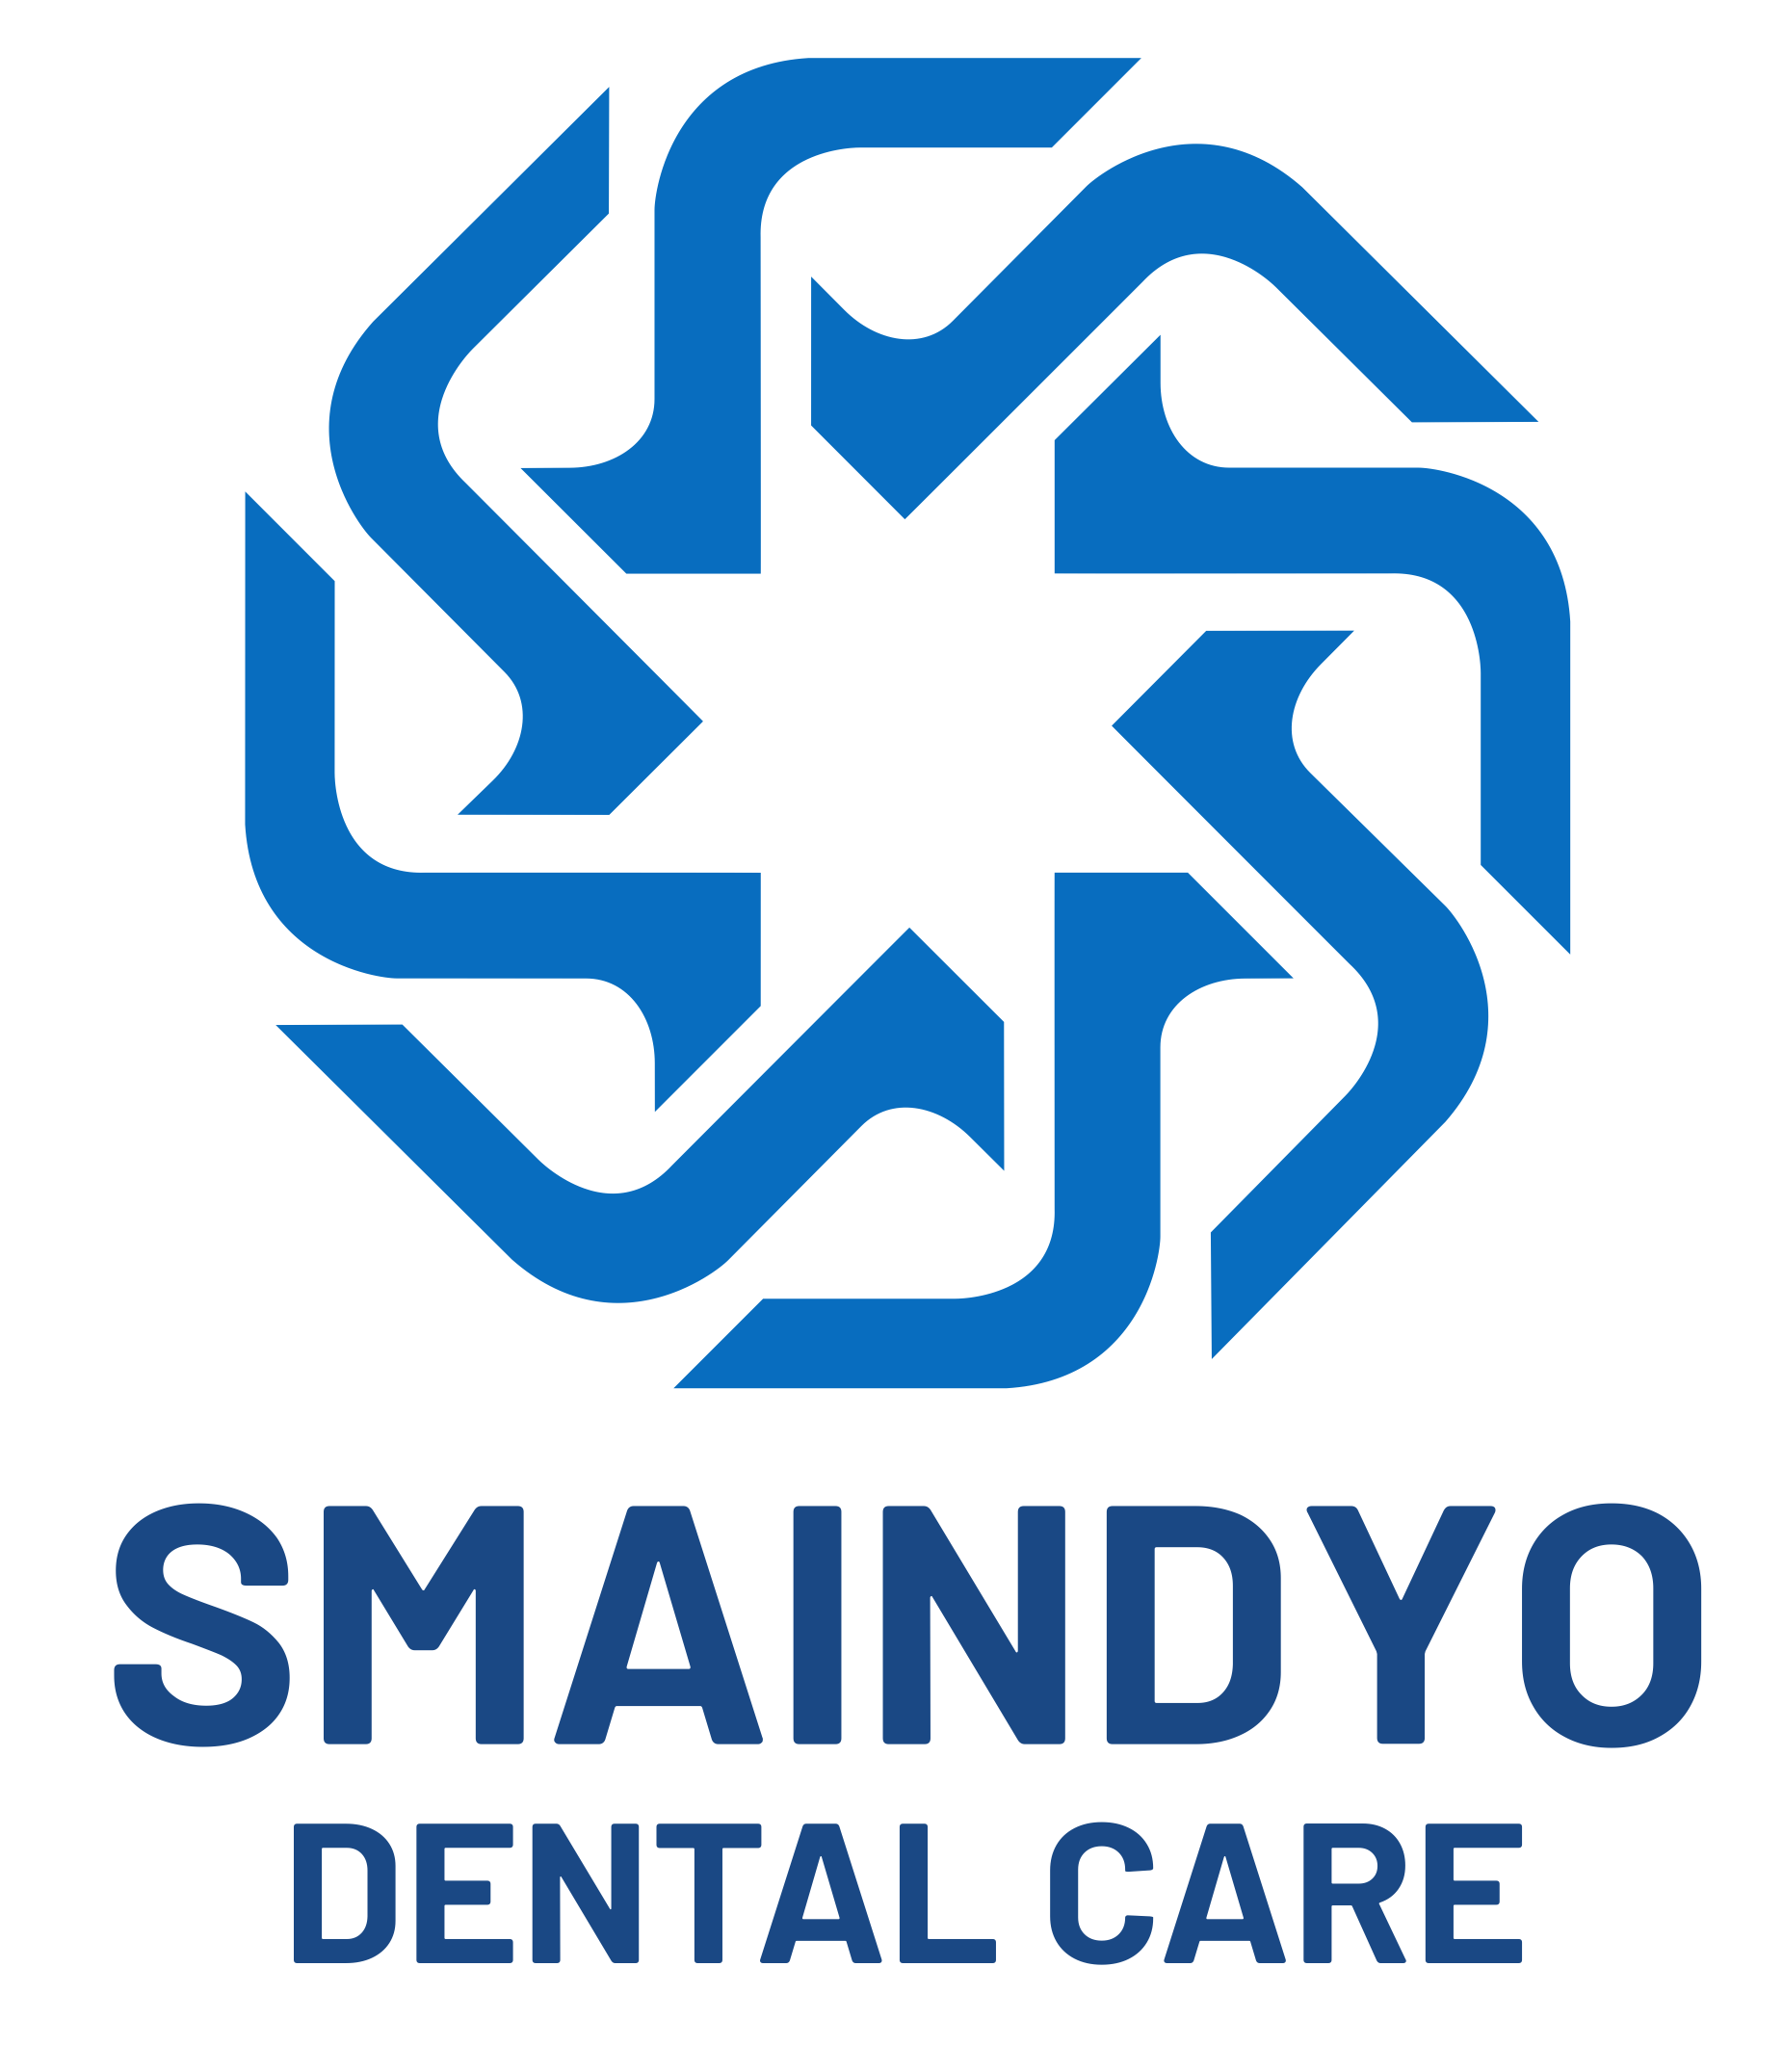 Smaindyo Dental Care | Best Dental Clinic in Nedumangad | Dental Clinic in Nedumangad